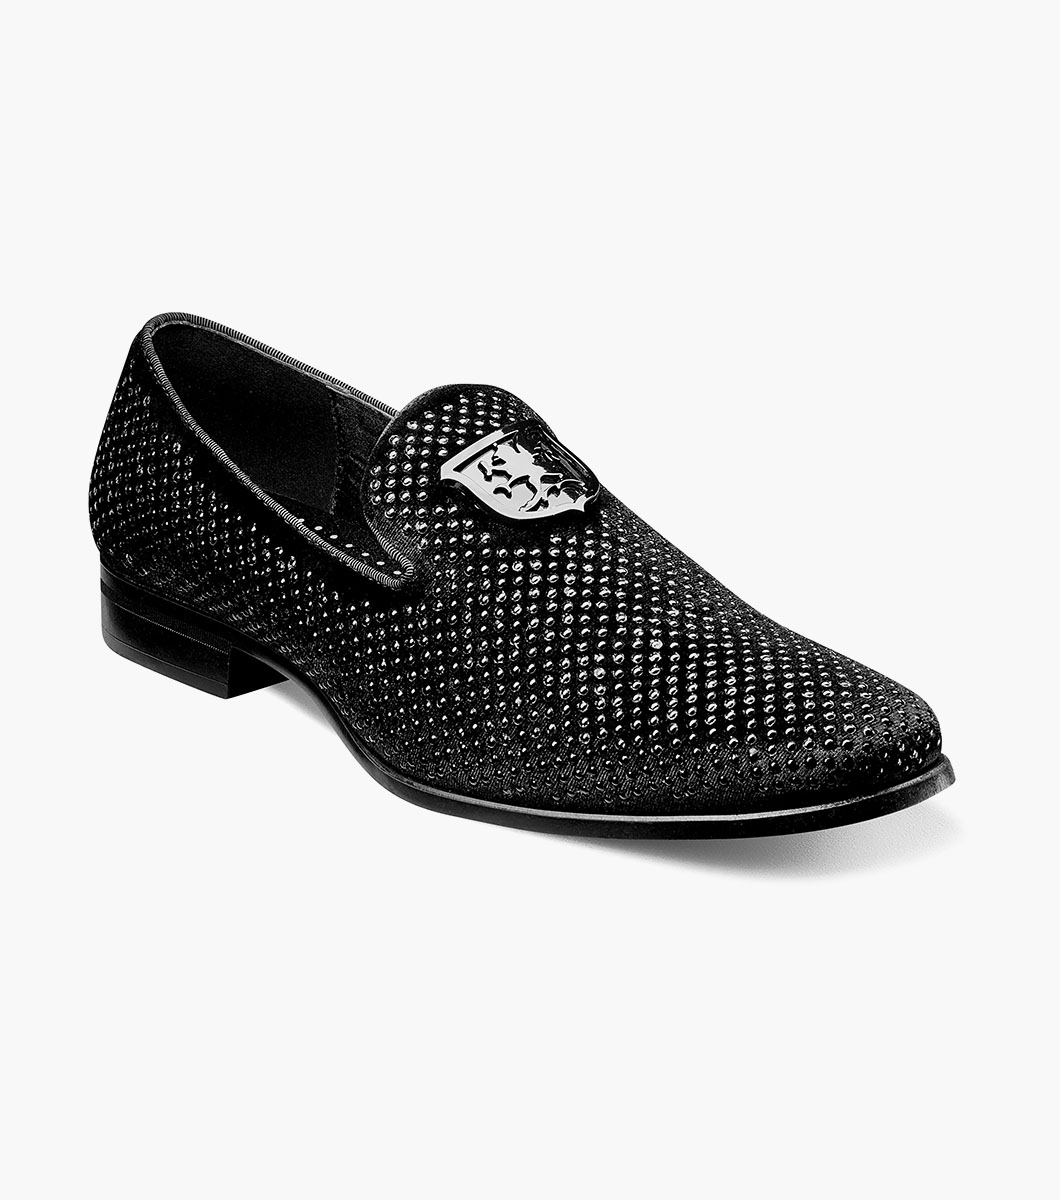 stacy adams slip on shoes